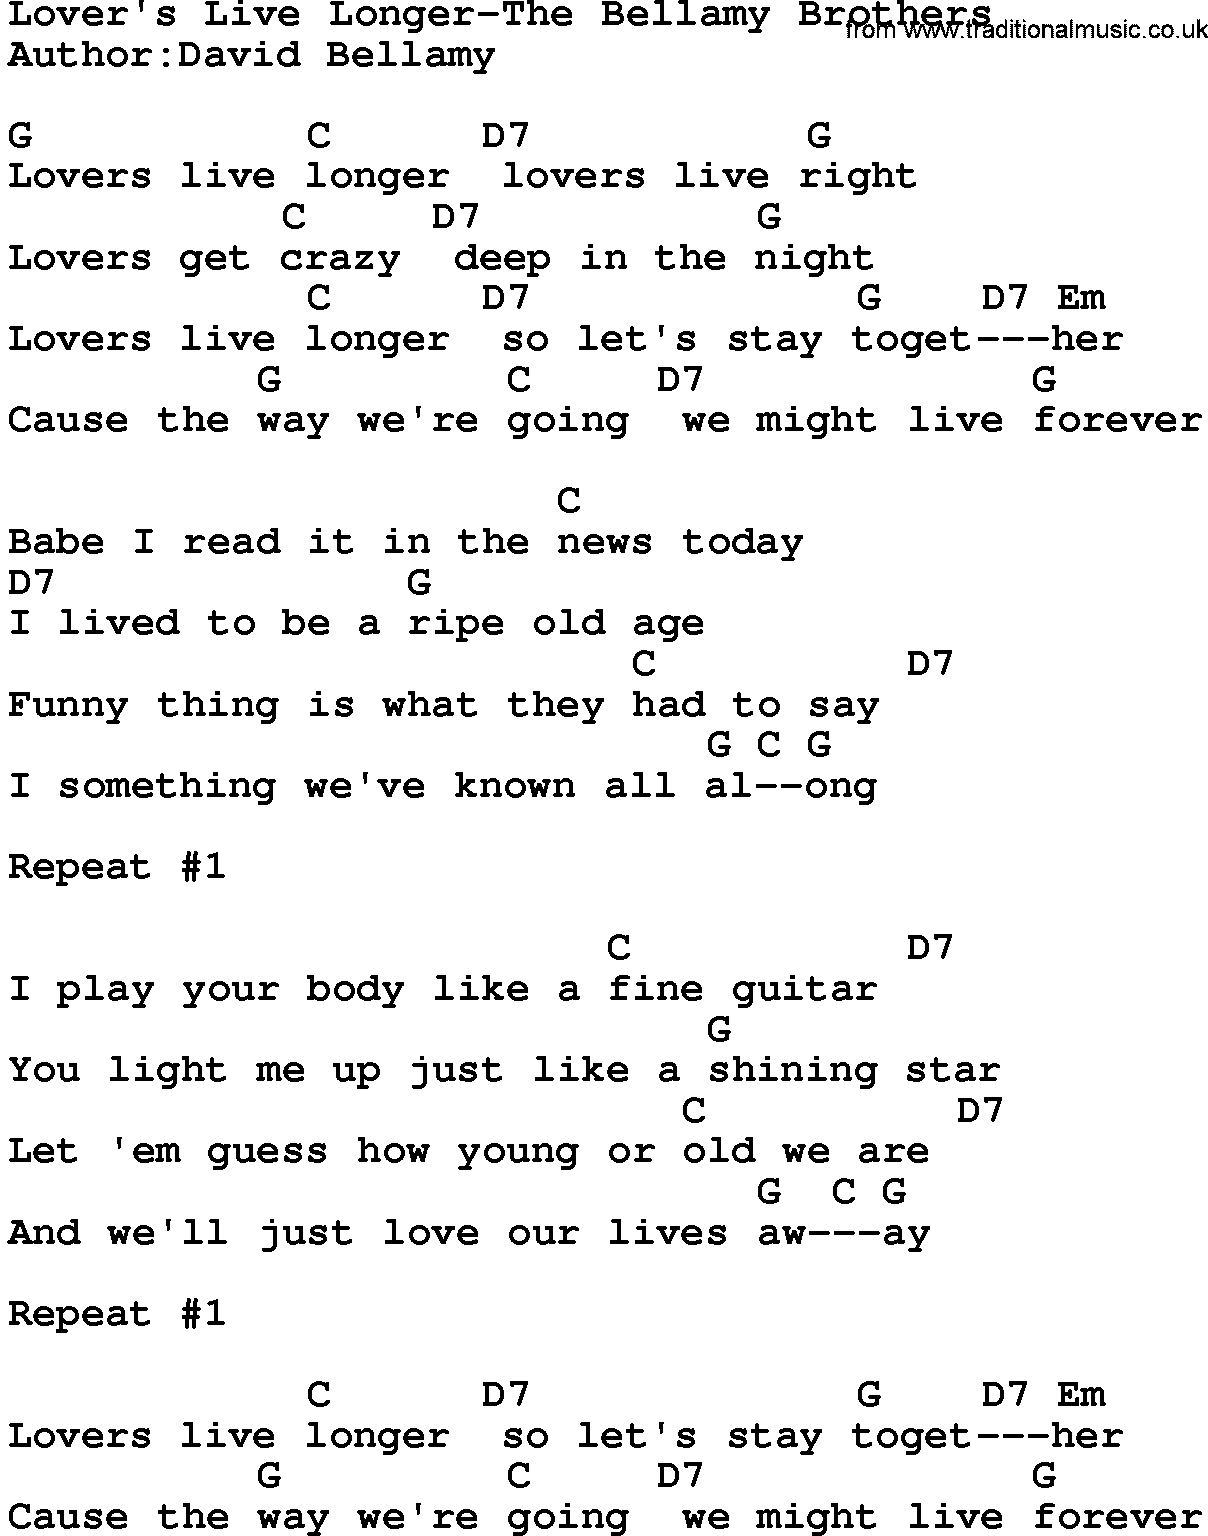 Country music song: Lover's Live Longer-The Bellamy Brothers lyrics and chords